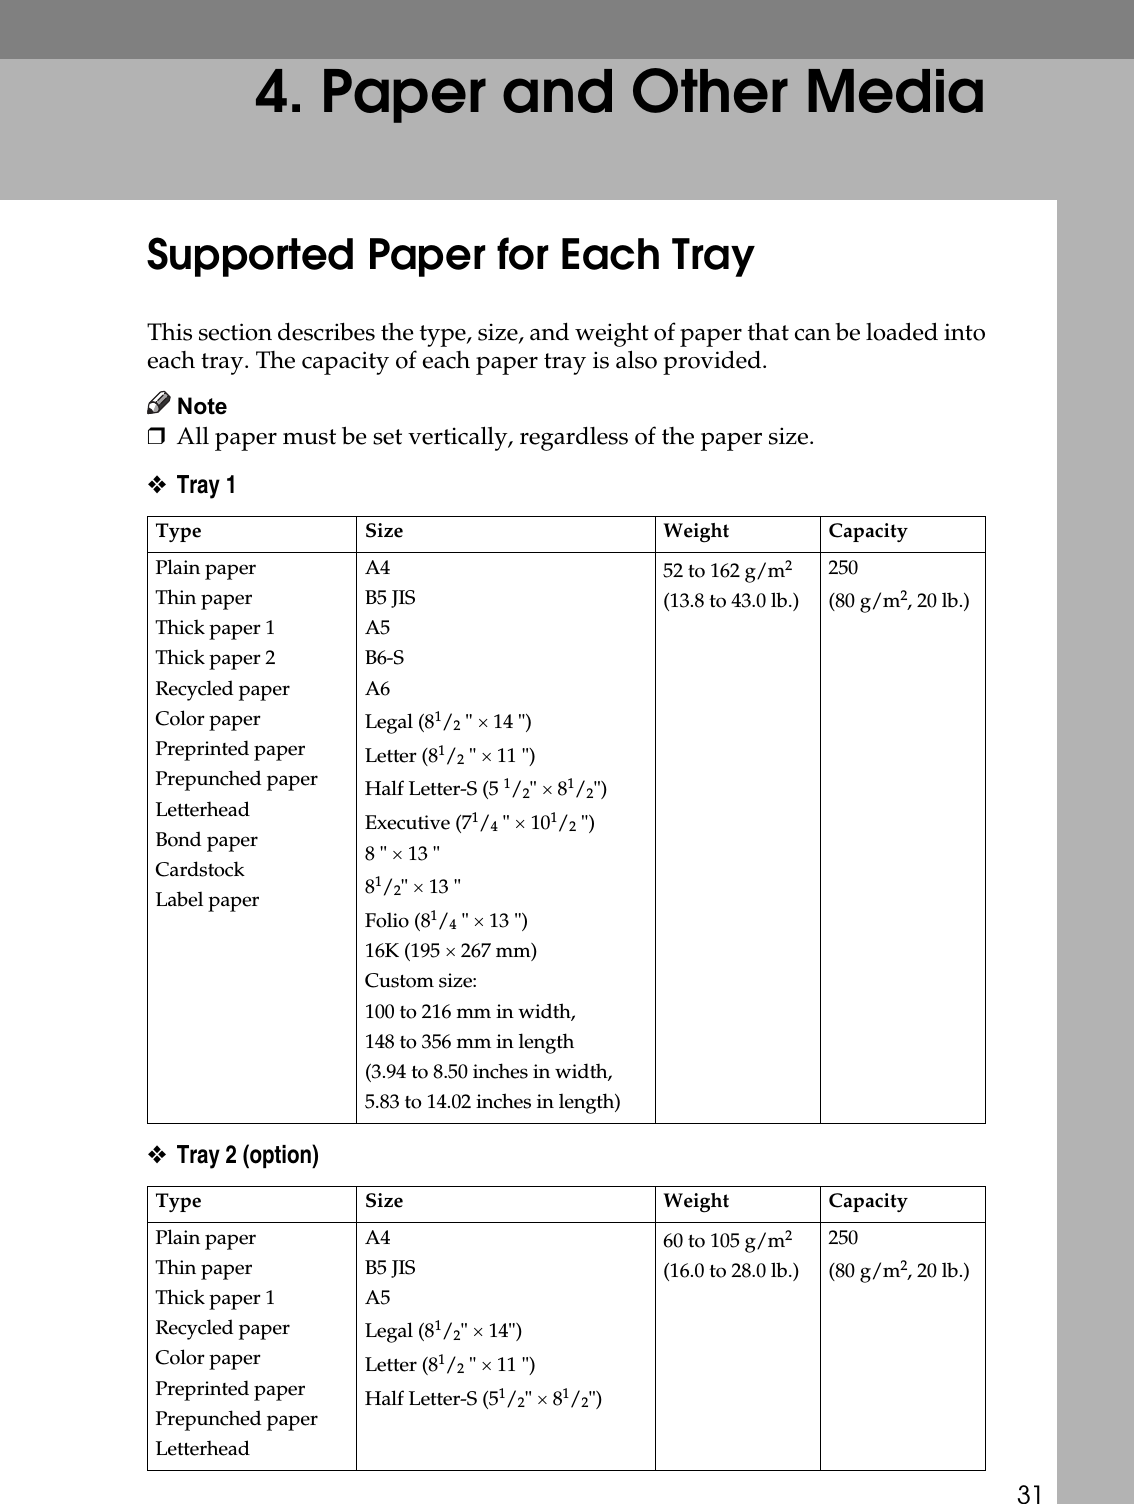 314. Paper and Other MediaSupported Paper for Each TrayThis section describes the type, size, and weight of paper that can be loaded intoeach tray. The capacity of each paper tray is also provided.Note❒All paper must be set vertically, regardless of the paper size.❖Tray 1❖Tray 2 (option)Type Size Weight CapacityPlain paperThin paperThick paper 1Thick paper 2Recycled paperColor paperPreprinted paperPrepunched paperLetterheadBond paperCardstockLabel paperA4B5 JISA5B6-SA6Legal (81/2 &quot; × 14 &quot;)Letter (81/2 &quot; × 11 &quot;)Half Letter-S (5 1/2&quot; × 81/2&quot;)Executive (71/4 &quot; × 101/2 &quot;)8 &quot; × 13 &quot;81/2&quot; × 13 &quot;Folio (81/4 &quot; × 13 &quot;)16K (195 × 267 mm)Custom size:100 to 216 mm in width,148 to 356 mm in length(3.94 to 8.50 inches in width,5.83 to 14.02 inches in length)52 to 162 g/m2 (13.8 to 43.0 lb.)250(80 g/m2, 20 lb.)Type Size Weight CapacityPlain paperThin paperThick paper 1Recycled paperColor paperPreprinted paperPrepunched paperLetterheadA4B5 JISA5Legal (81/2&quot; × 14&quot;)Letter (81/2 &quot; × 11 &quot;)Half Letter-S (51/2&quot; × 81/2&quot;)60 to 105 g/m2 (16.0 to 28.0 lb.)250(80 g/m2, 20 lb.)